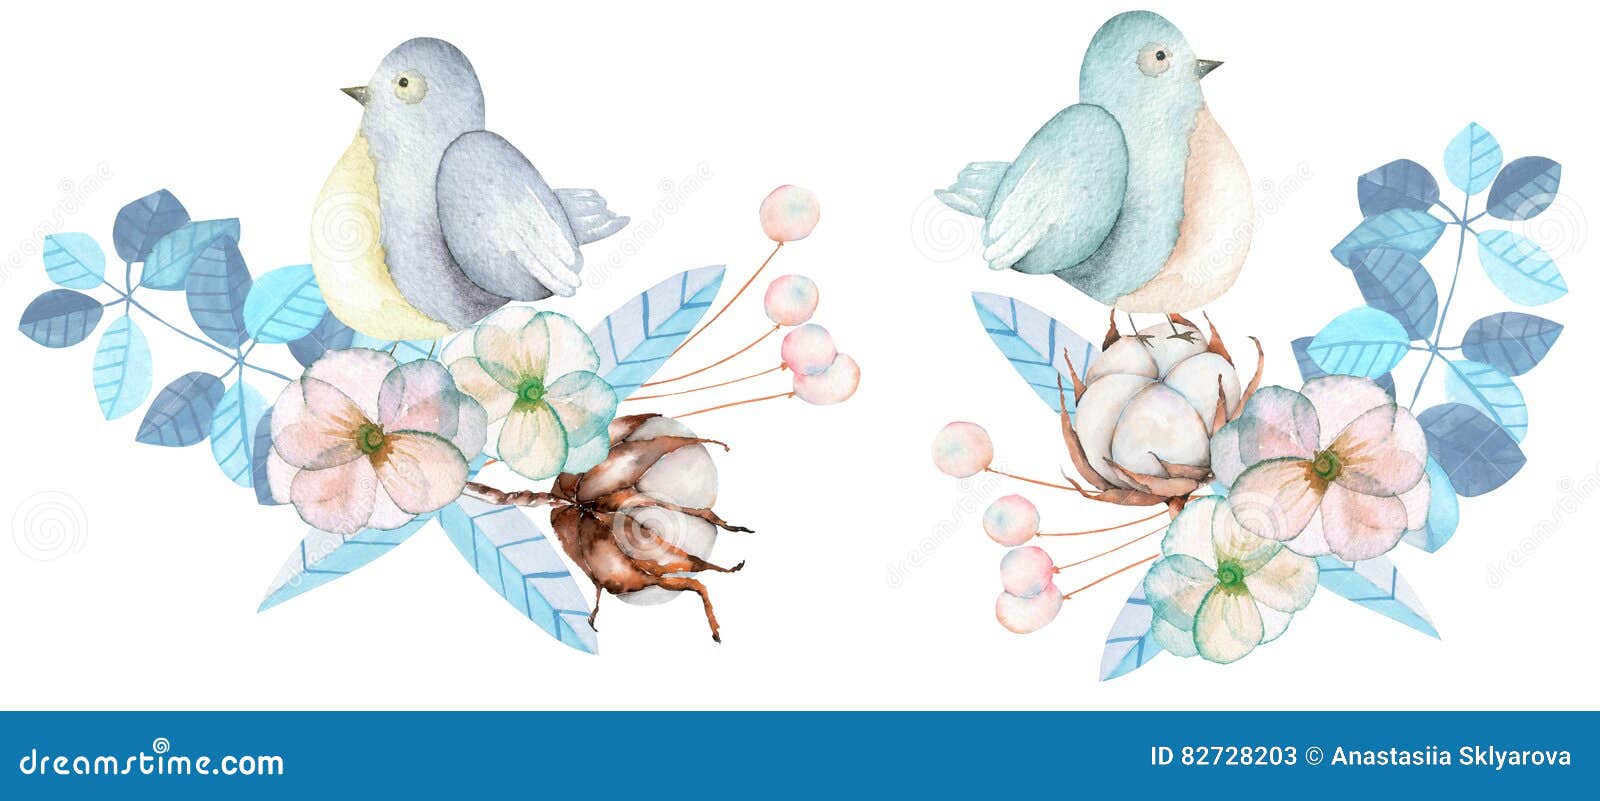 Download Illustration Of The Watercolor Cute Birds With Tender Blue ...